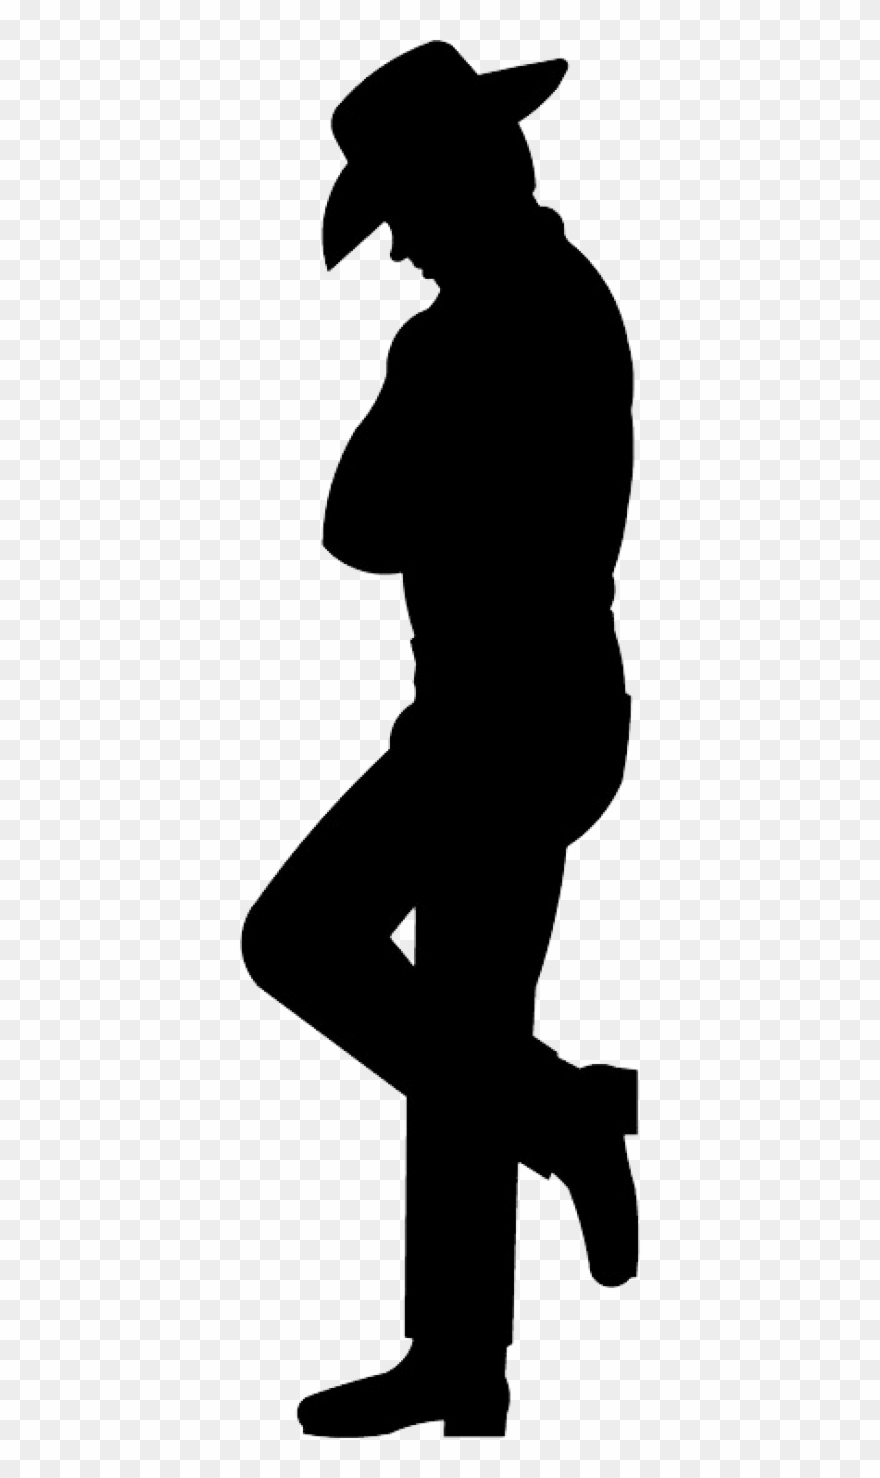 Cowboy Silhouette Png, Download Png Image With Transparent.